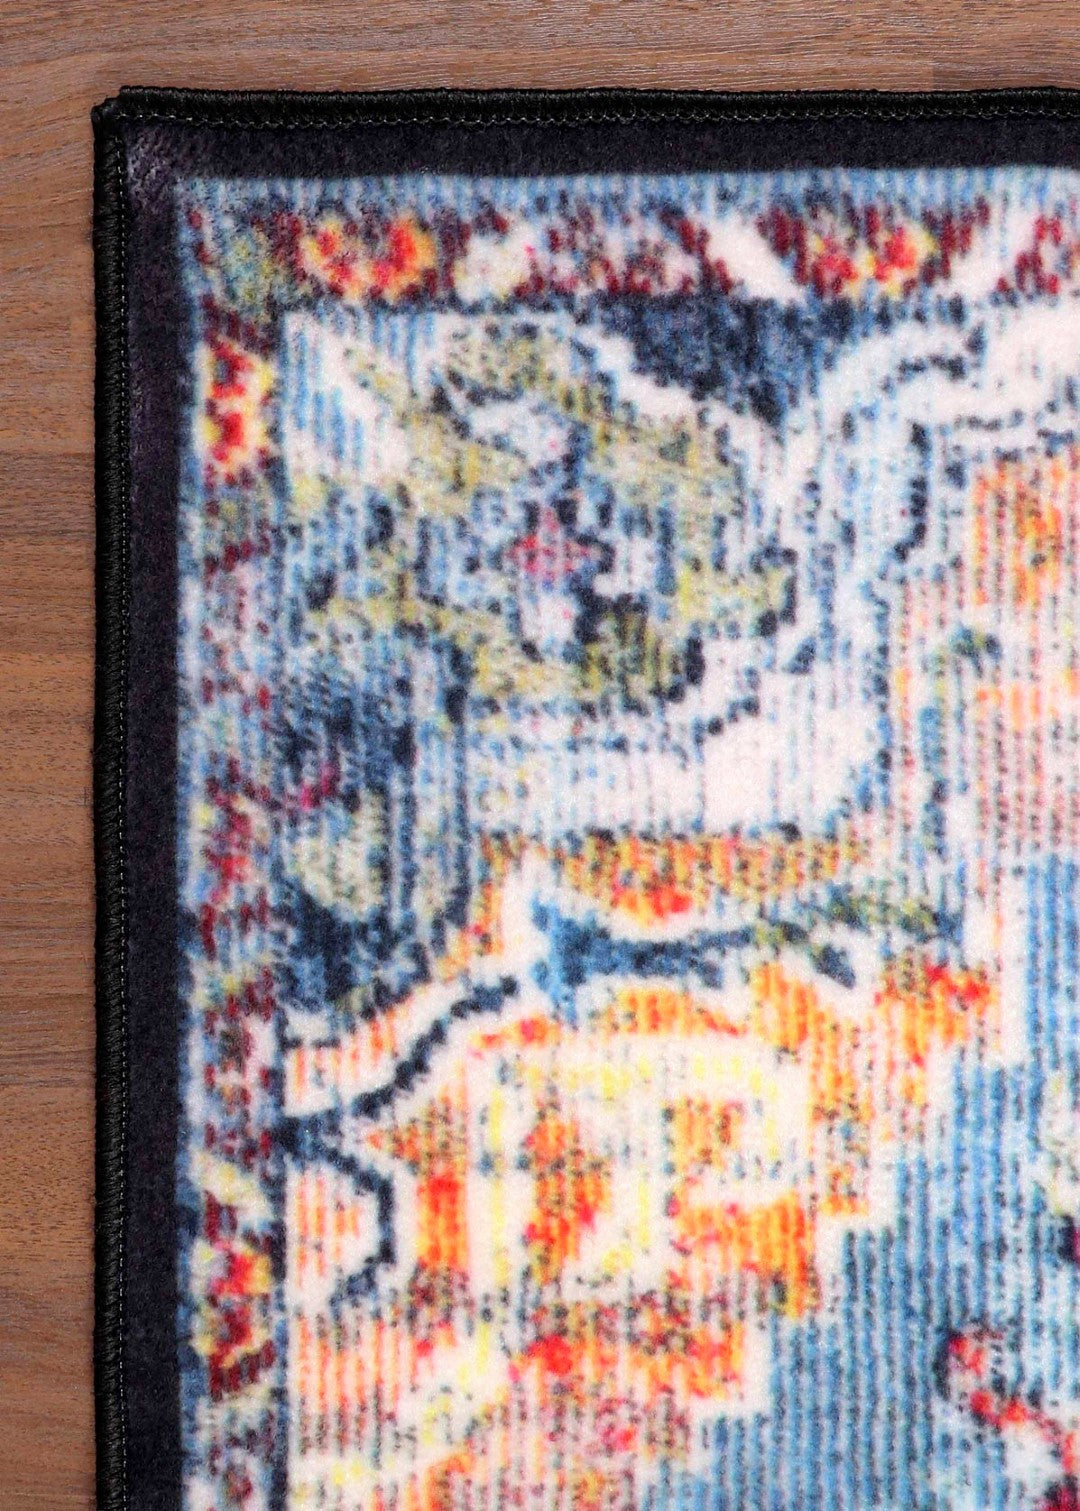 Eclectic Medley Tapestry Rug